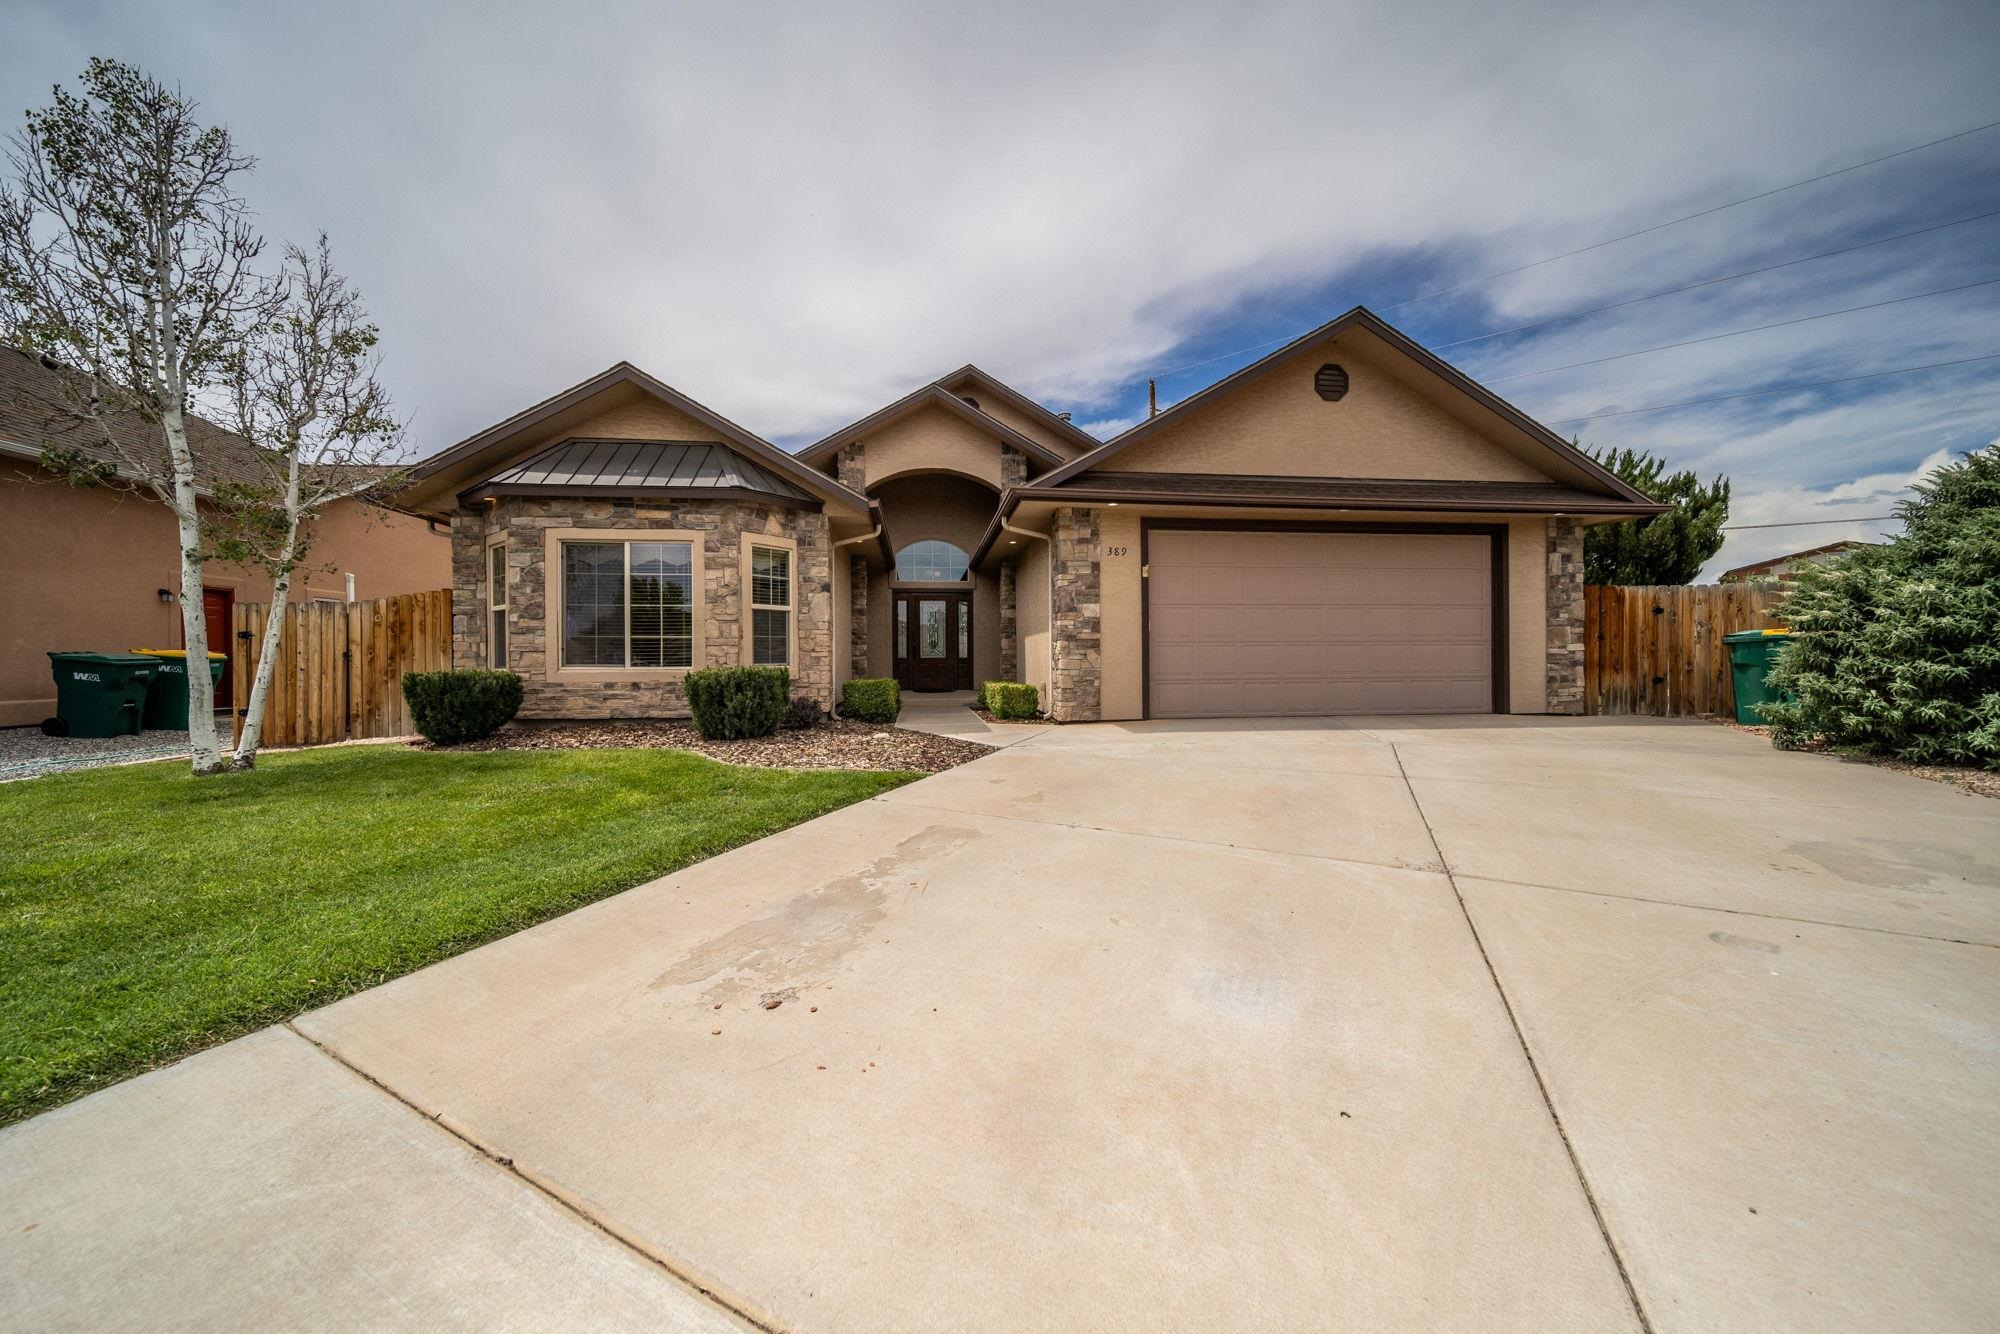 A rare gem in Vista Valley subdivision in beautiful Fruita. Built with many builder upgrades, this  low maintenance, 3-bedroom, 2-bathroom home boasts wood flooring in the living room, a rocked gas fireplace with numerous built-in cabinets and display areas, and in-floor radiant heating...and a HEATED GARAGE! With soaring vaulted ceilings, the entertaining area enjoys a buillt-in range hood and stunning black granite countertops with custom wood grain cabinetry.  Solid core wooden doors and trim add a luxurious touch throughout. The master en suite enjoys dual closets, dual vanities, a walk-in shower and jetted soaker tub, along with access to the private, covered patio area. Carpets have been shampooed and stretched. Includes newer KitchenAid dishwasher (2022) and refrigerator (2023), as well as a washer/dryer/electric range and built-in microwave. Vista Valley amenities includes parks and walking paths. This property is fully fenced and has landscaping on timed irrigation water. Water heater was also replaced in 2023, along with additional insulation in the HEATED garage,  and the 6' privacy fence along the back side was installed in 2020. This home has everything needed for easy, low maintenance living, and the pride of ownership shows through. Come see this beautiful home before it is gone!